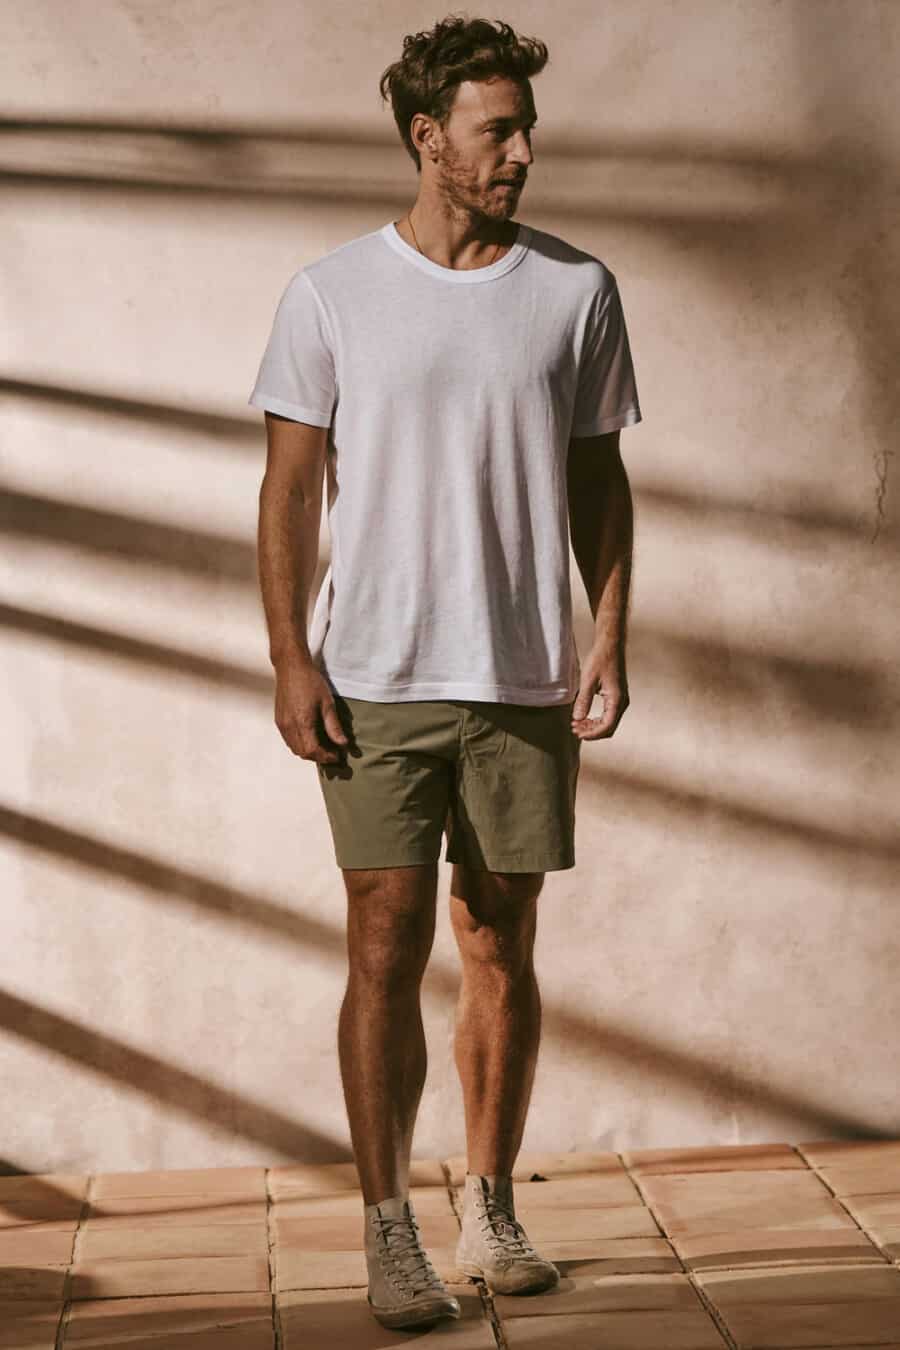 Men's green shorts, white T-shirt and off-white canvas high-top sneakers outfit